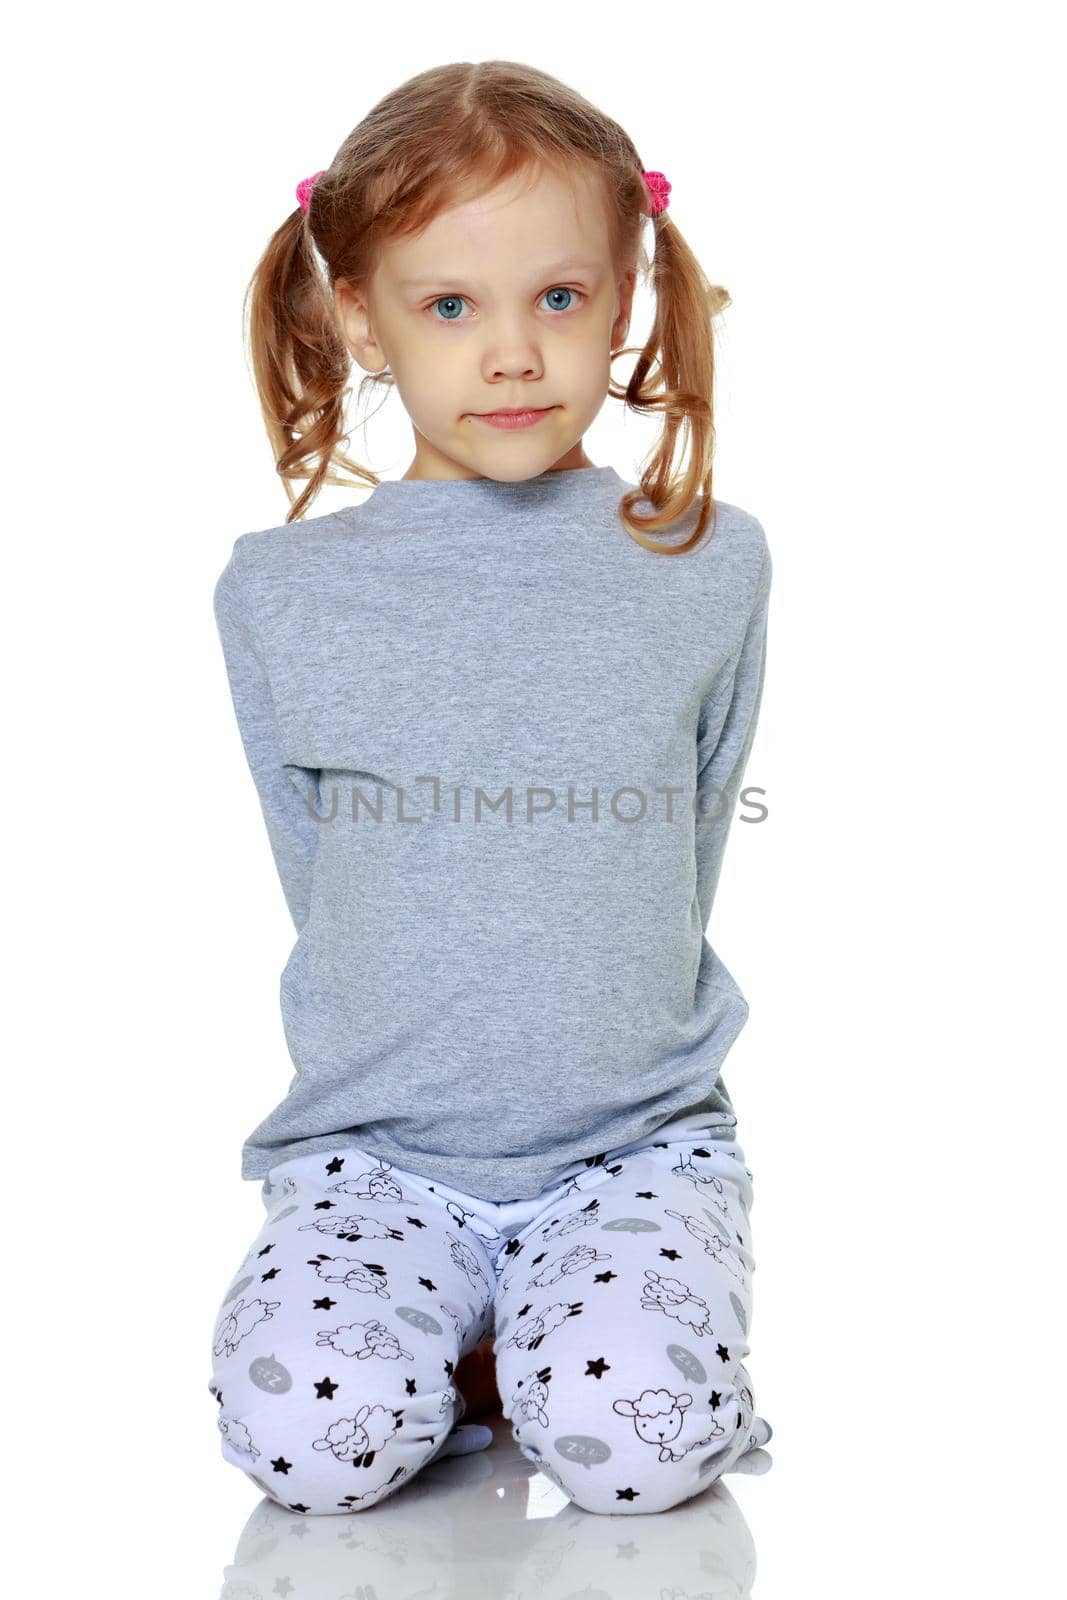 Little girl in pajamas. Concept of family happiness, child, isolated on white background.